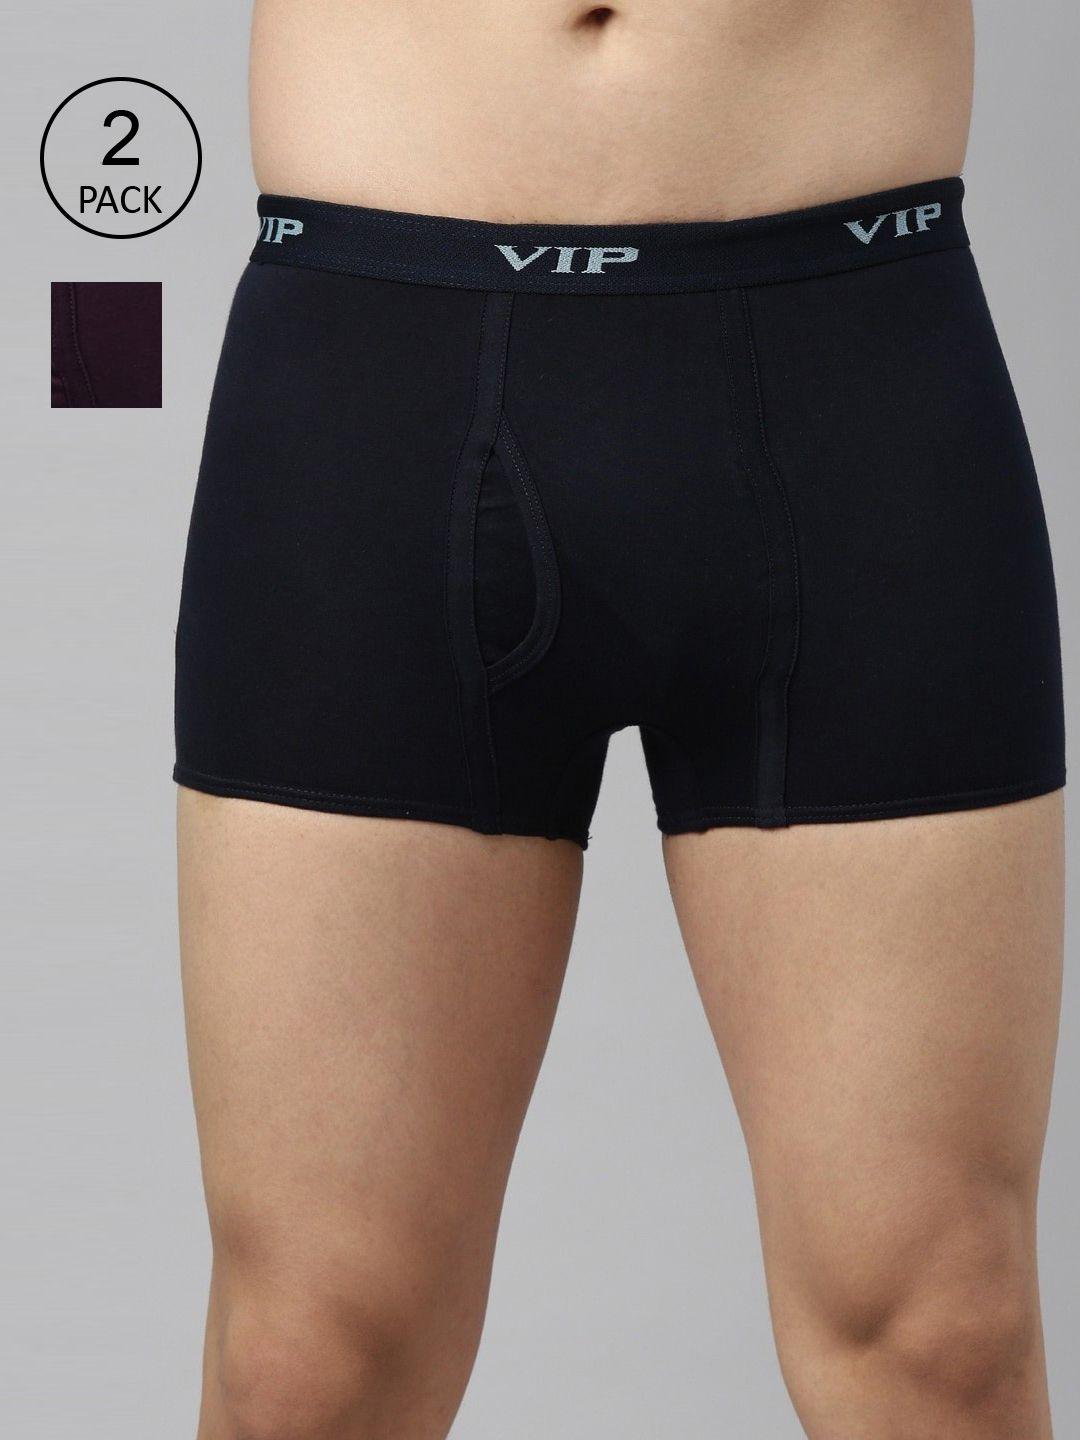 vip men pack of 2 assorted pure cotton trunks punchp1_95